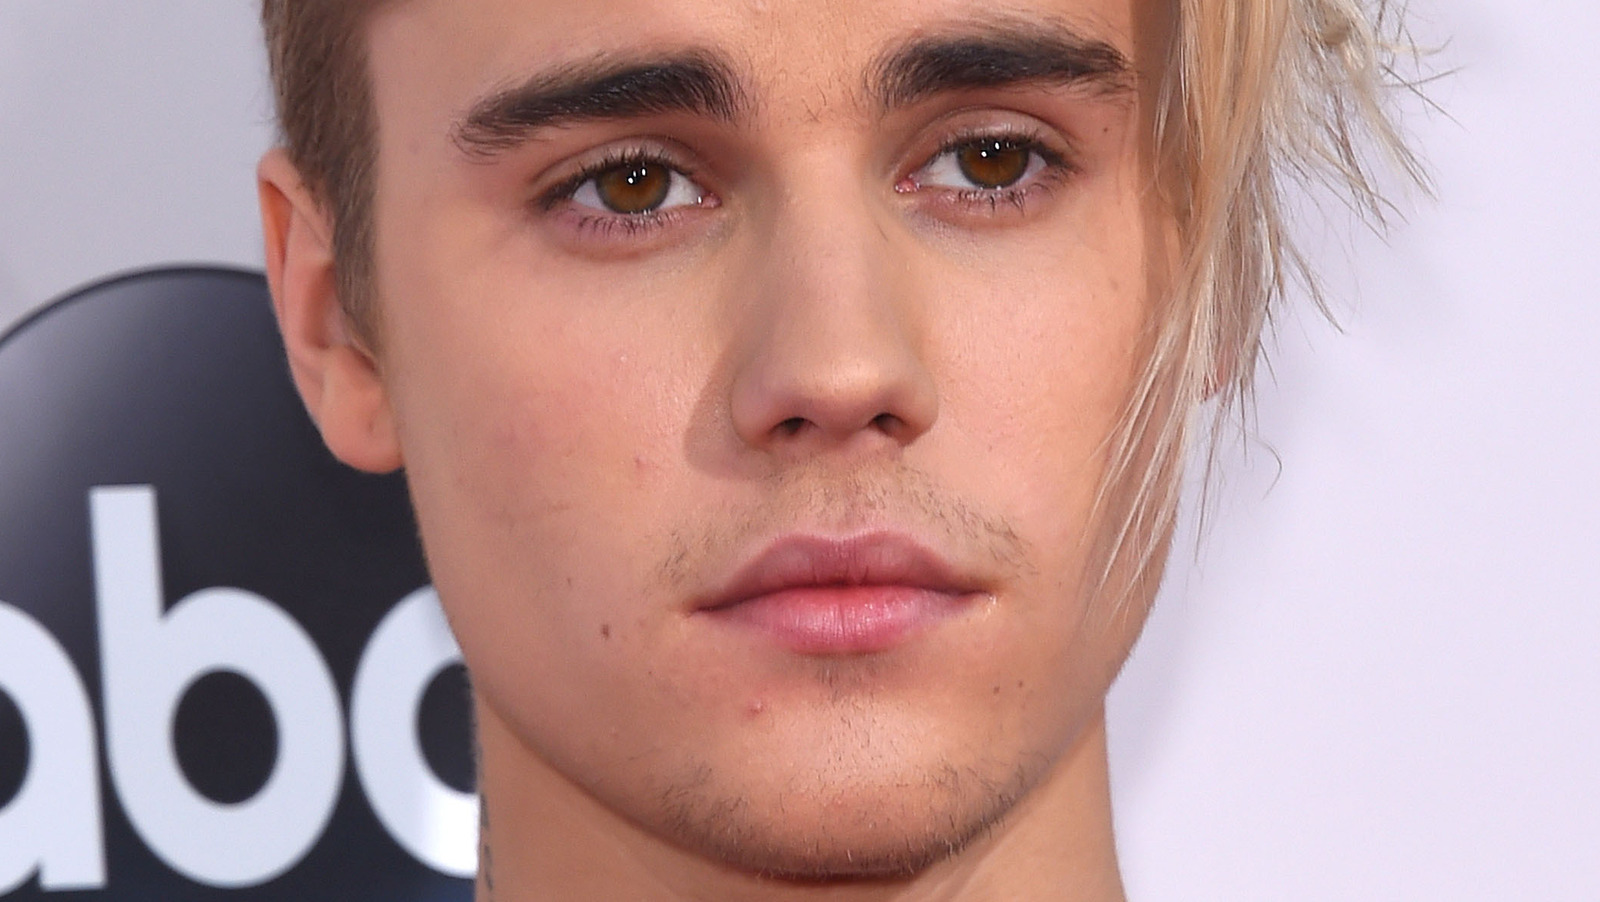 The CSI Star Who Called Out Justin Bieber’s Behavior On Set